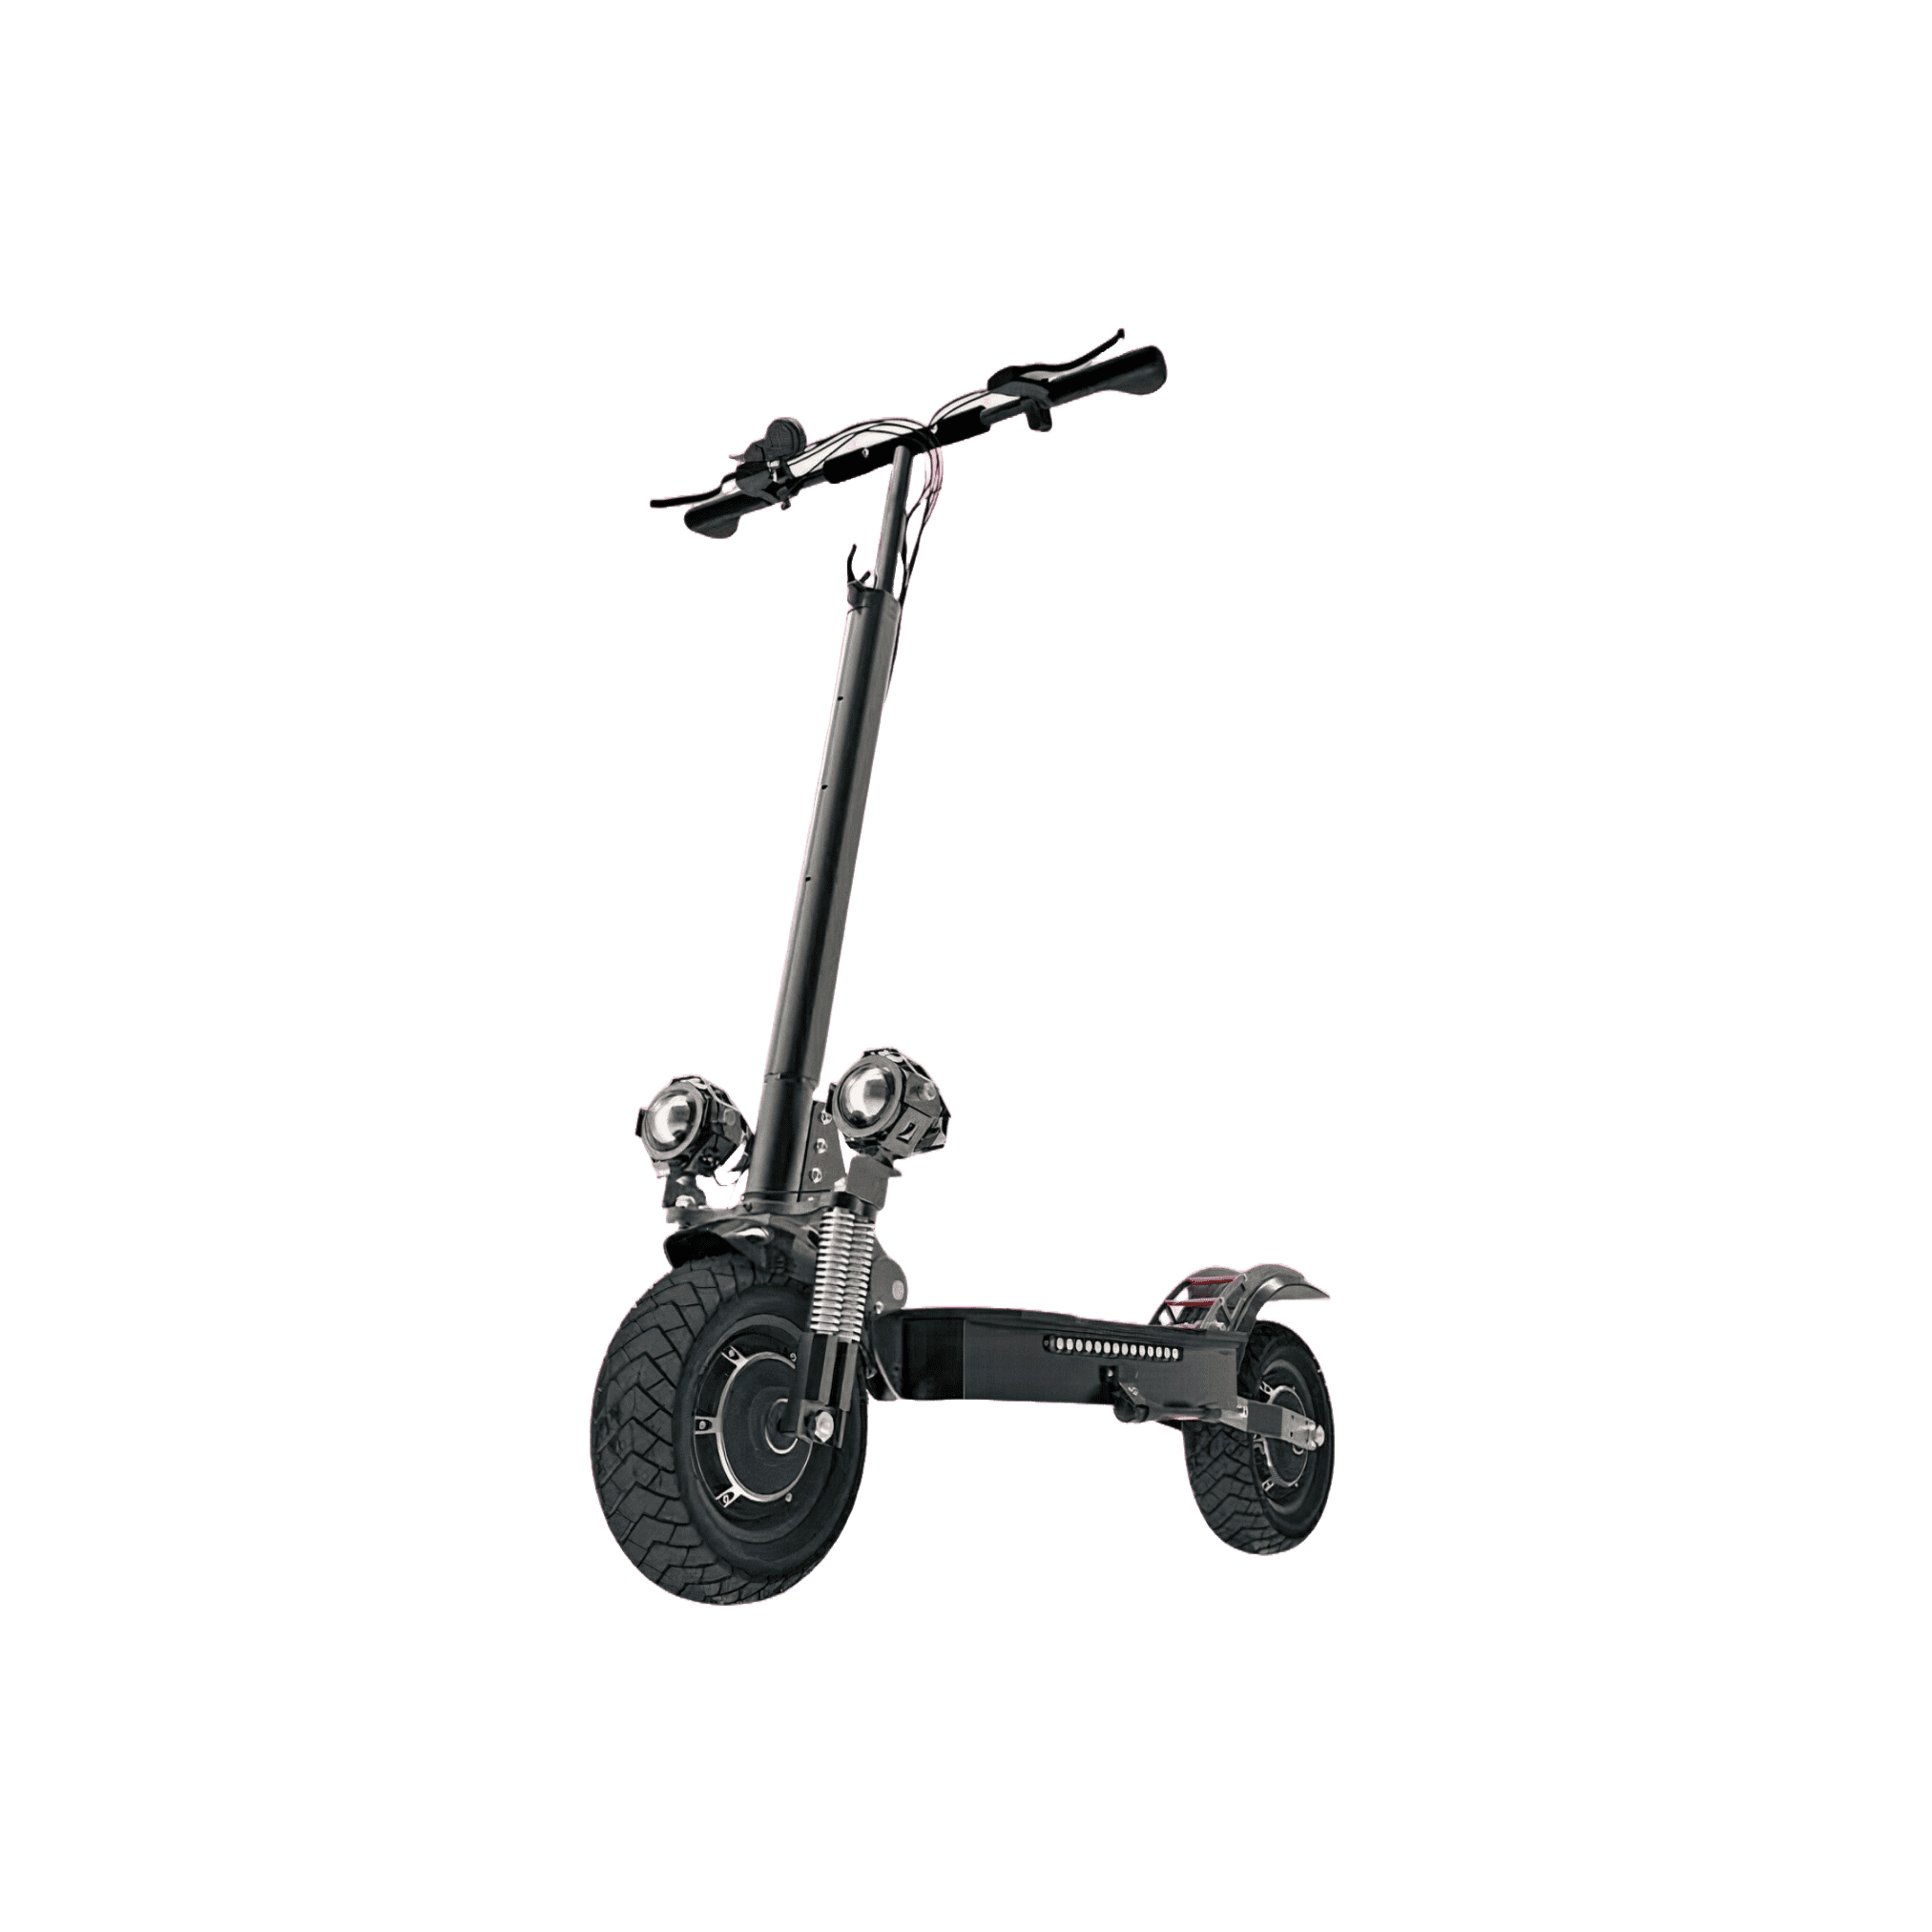 AJOOSOS X700 FOLDABLE ELECTRIC SCOOTER - ScootiBoo